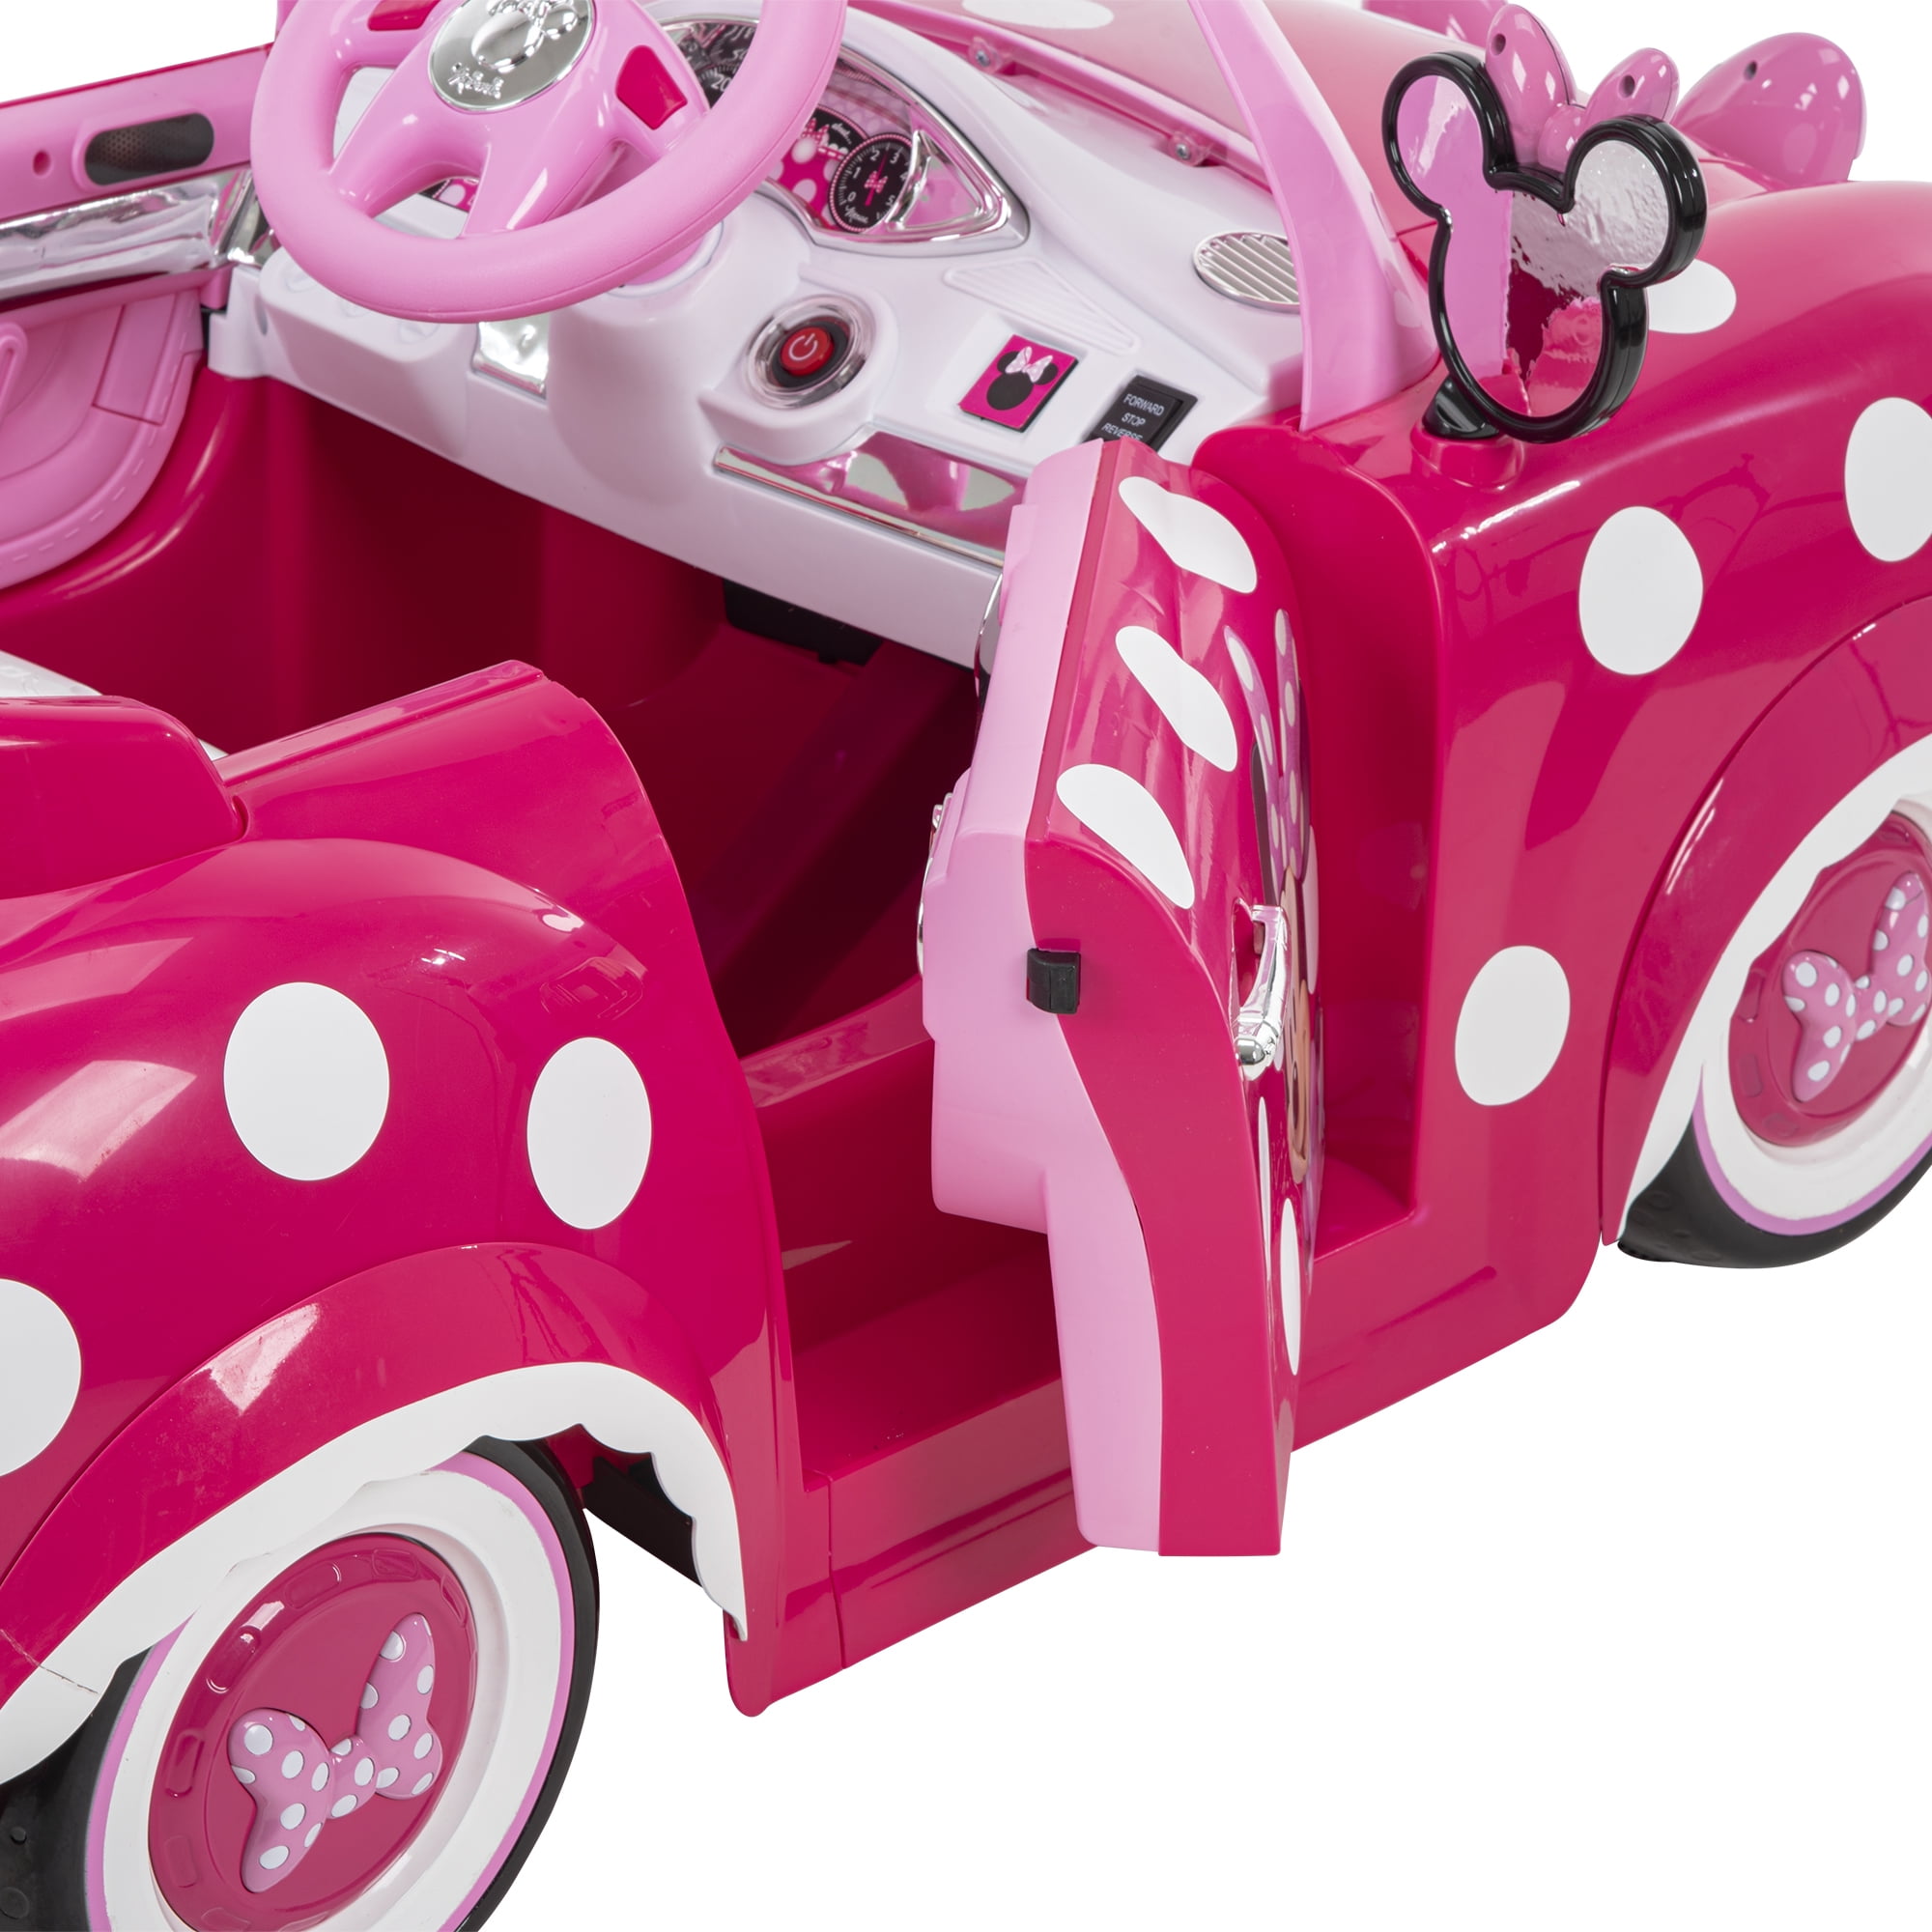 Disney Minnie Mouse Convertible Car 6-Volt Electric Ride-On By Huffy ...